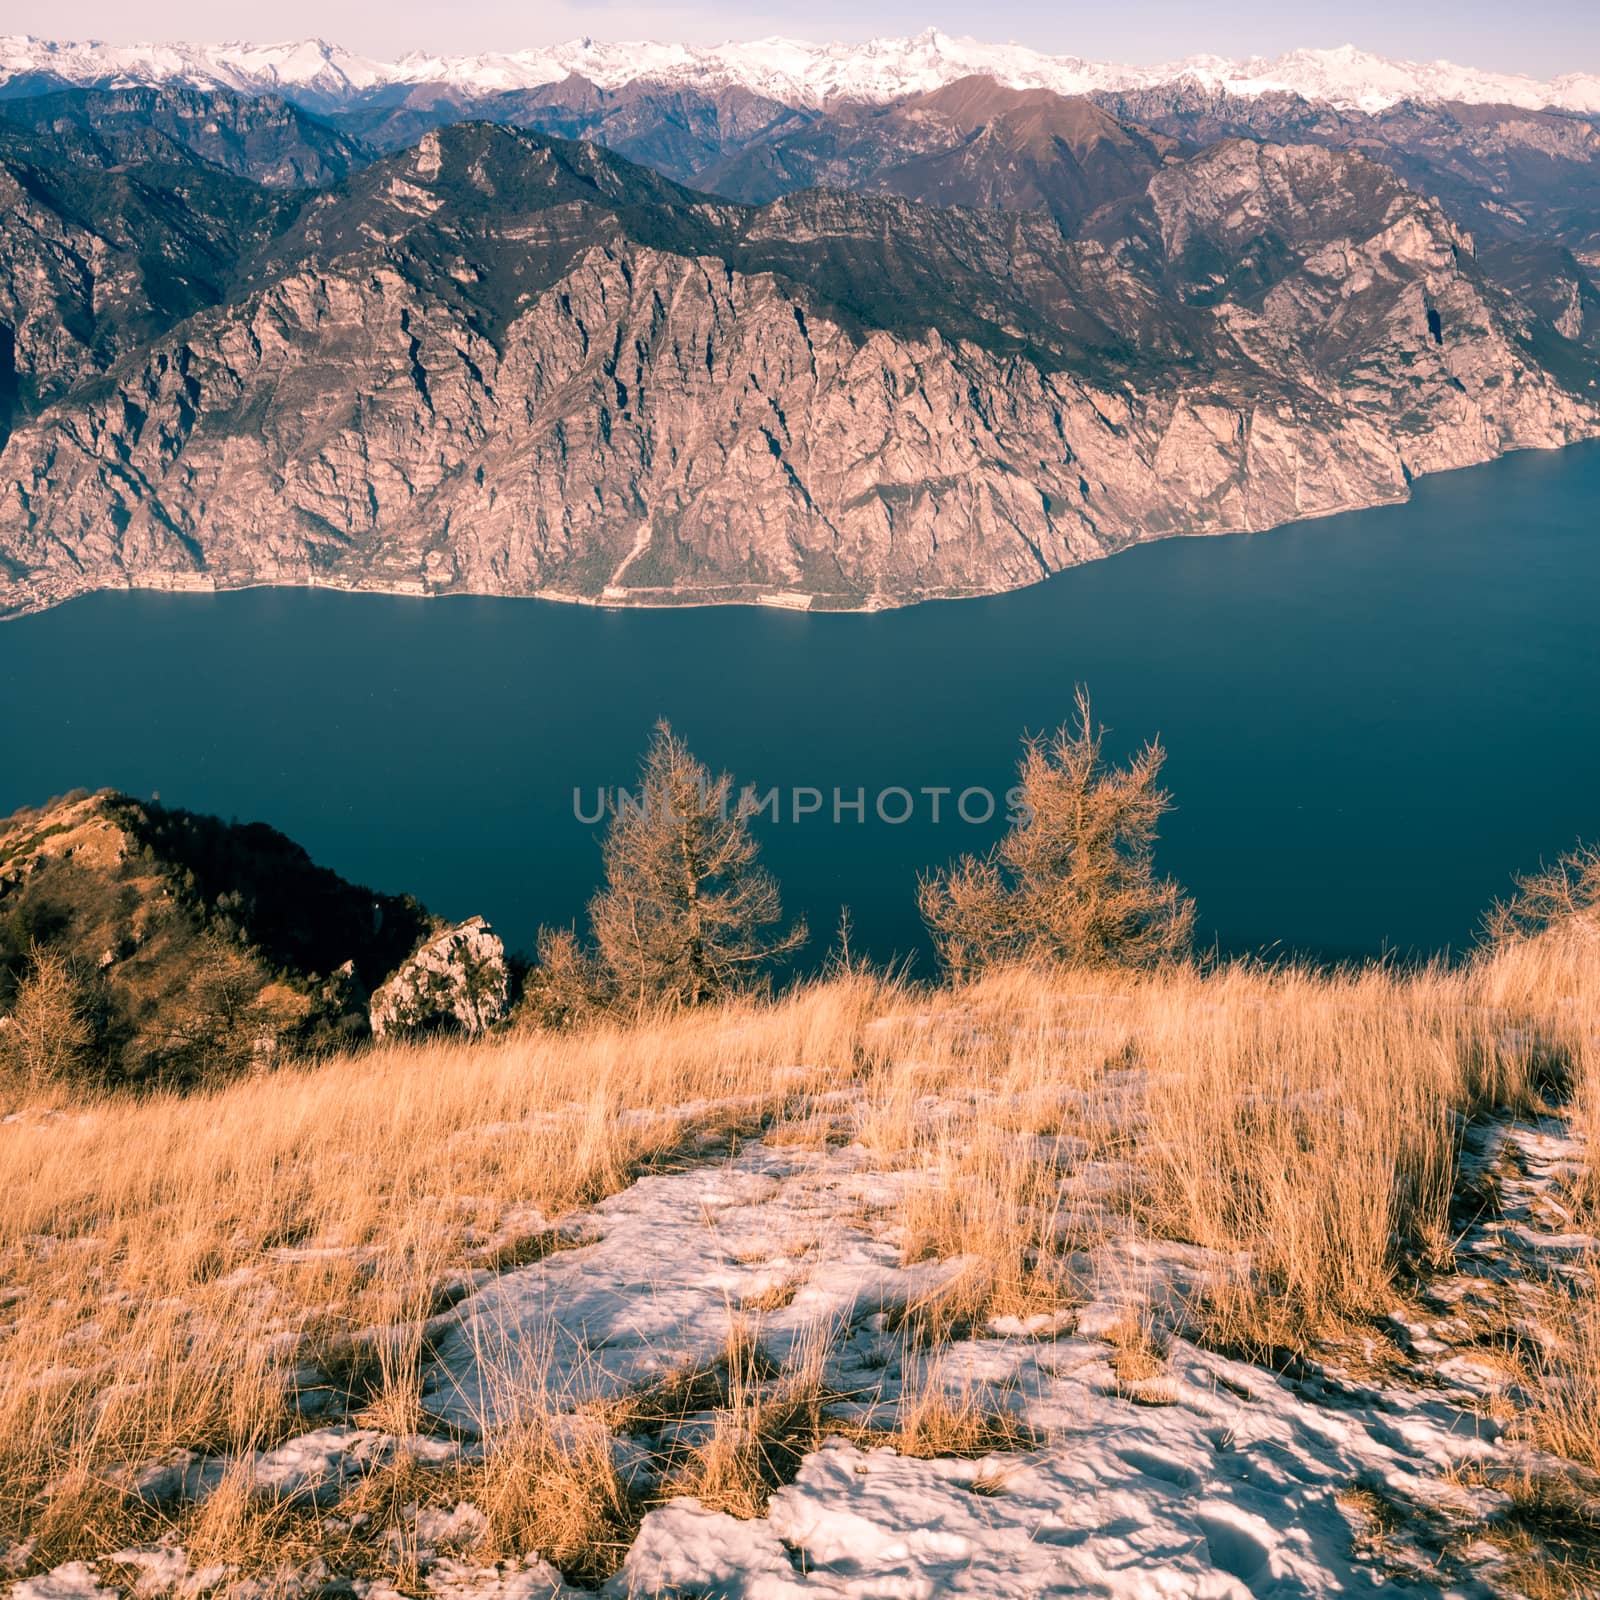 Panorama of Lake Garda seen from the top of Mount Baldo, Italy. by Isaac74